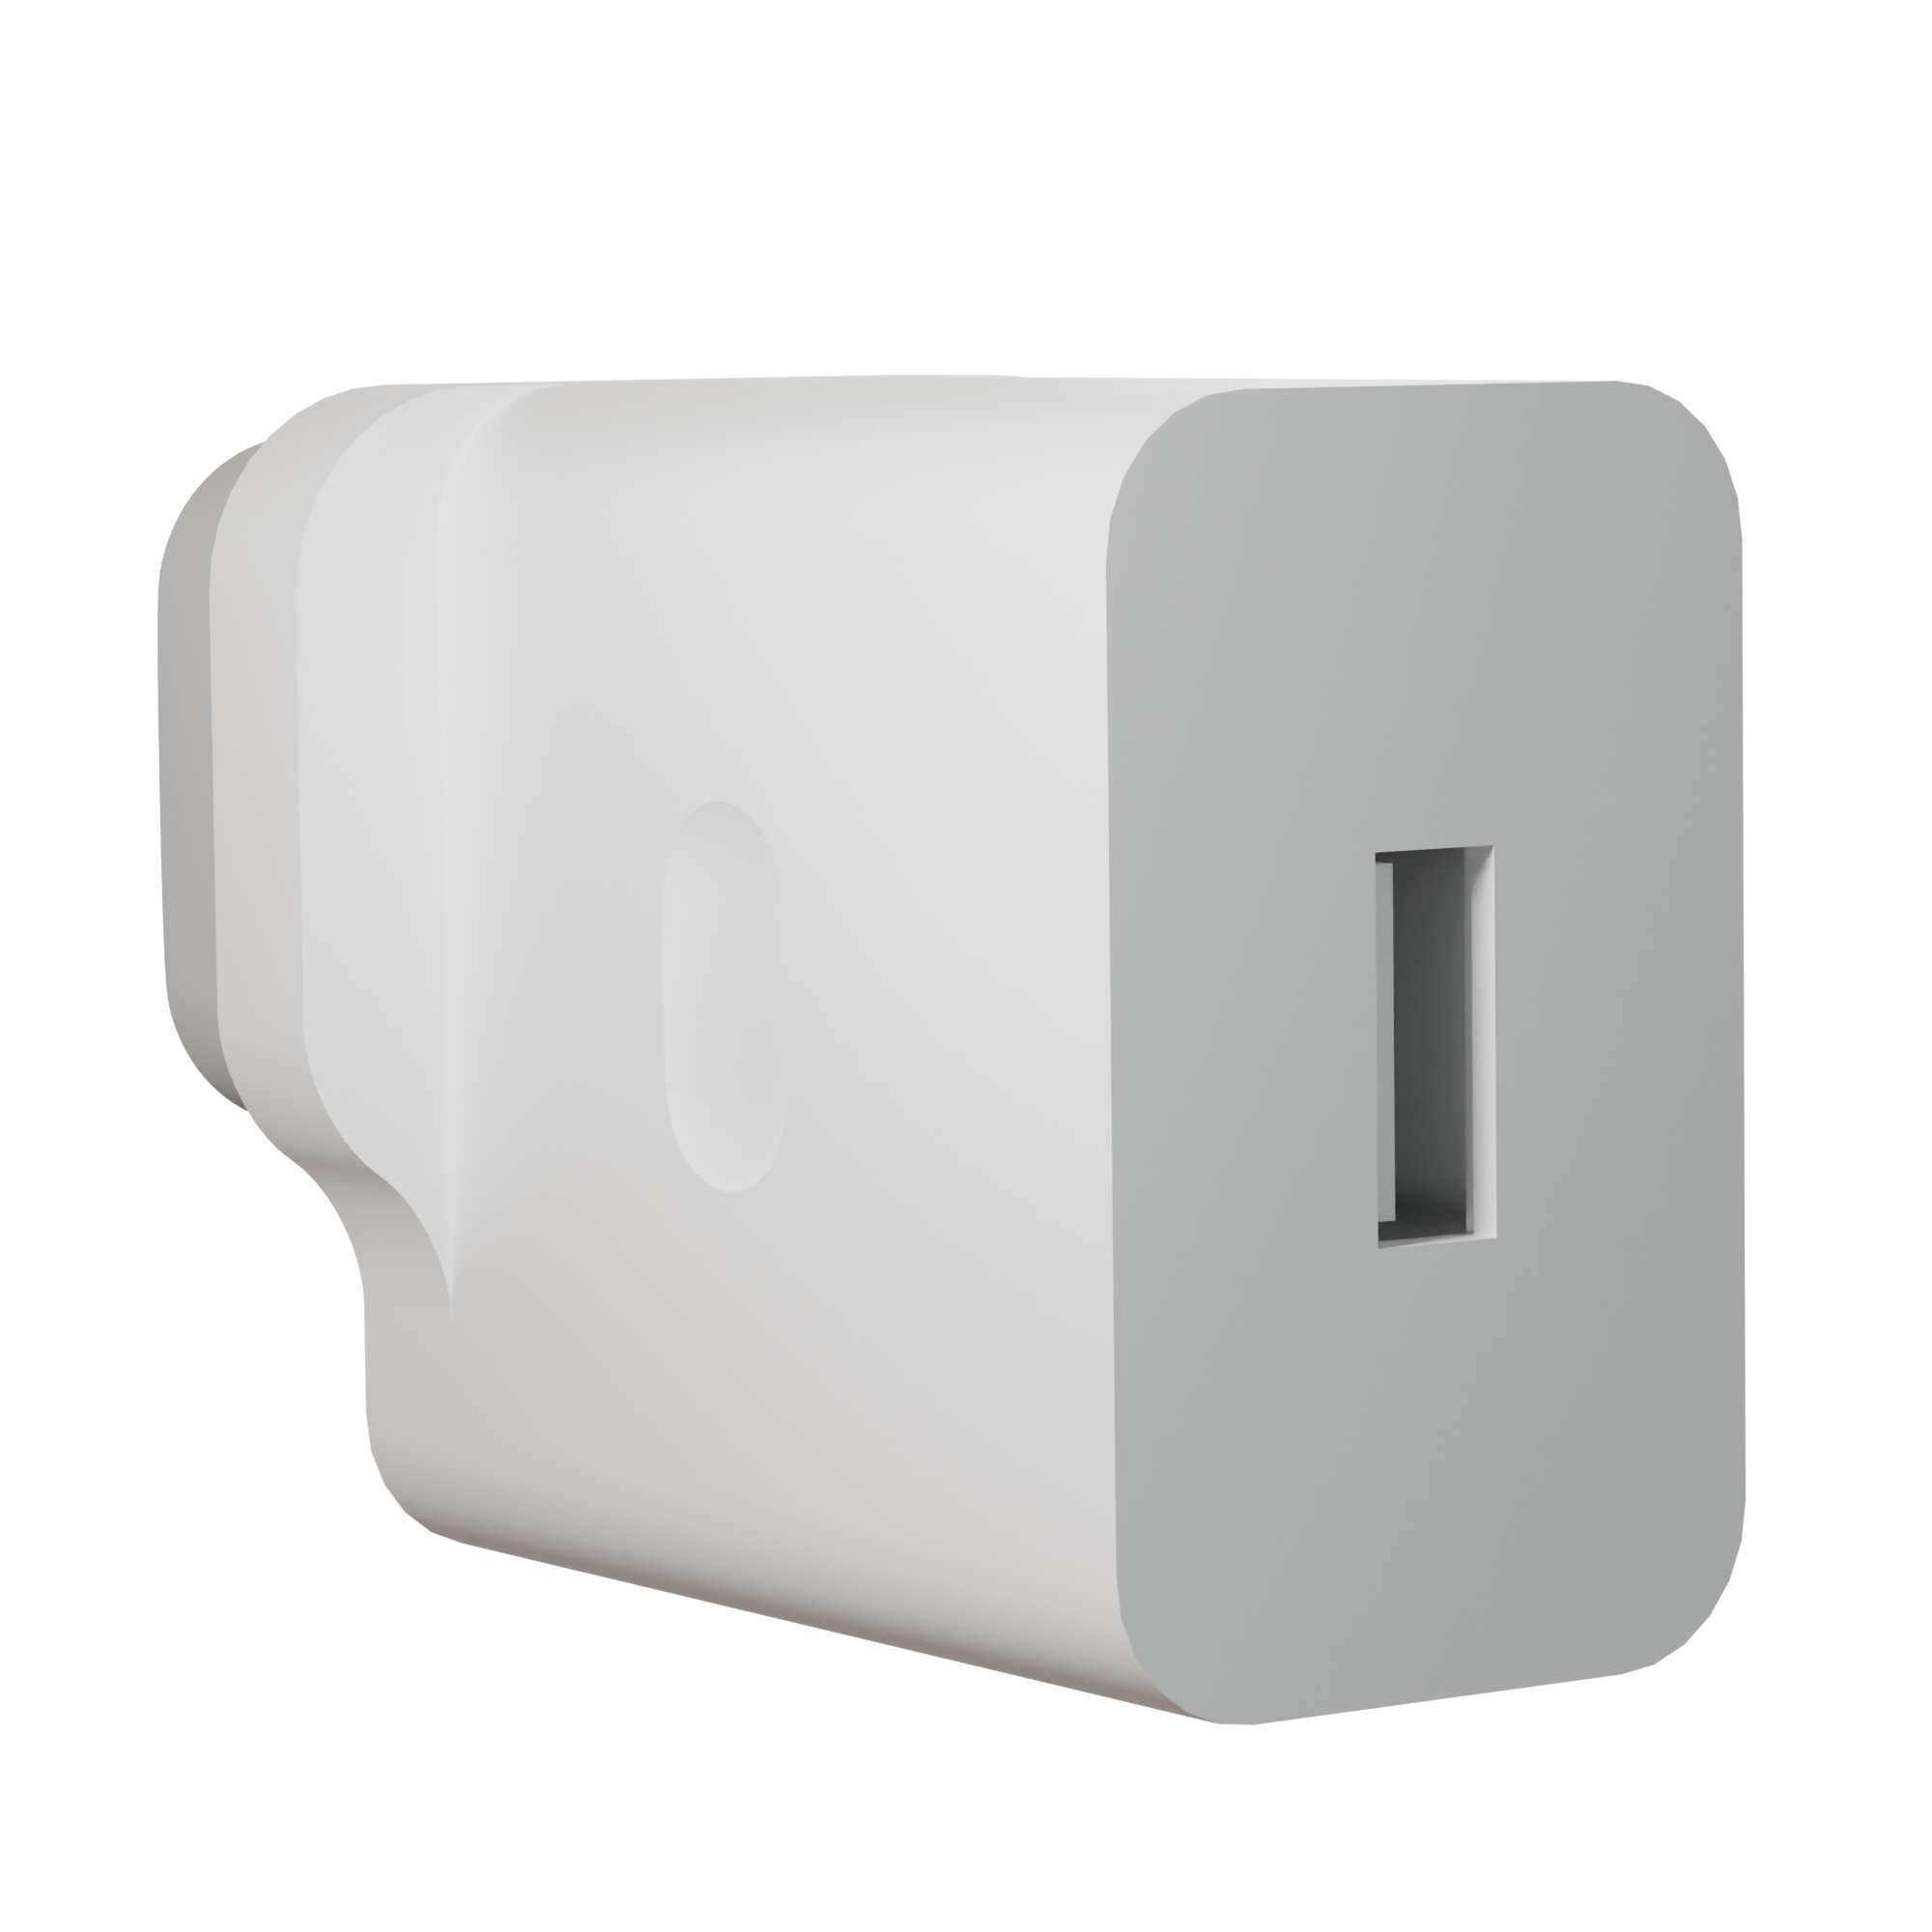 OPPO VOOC 18W Wall Charger